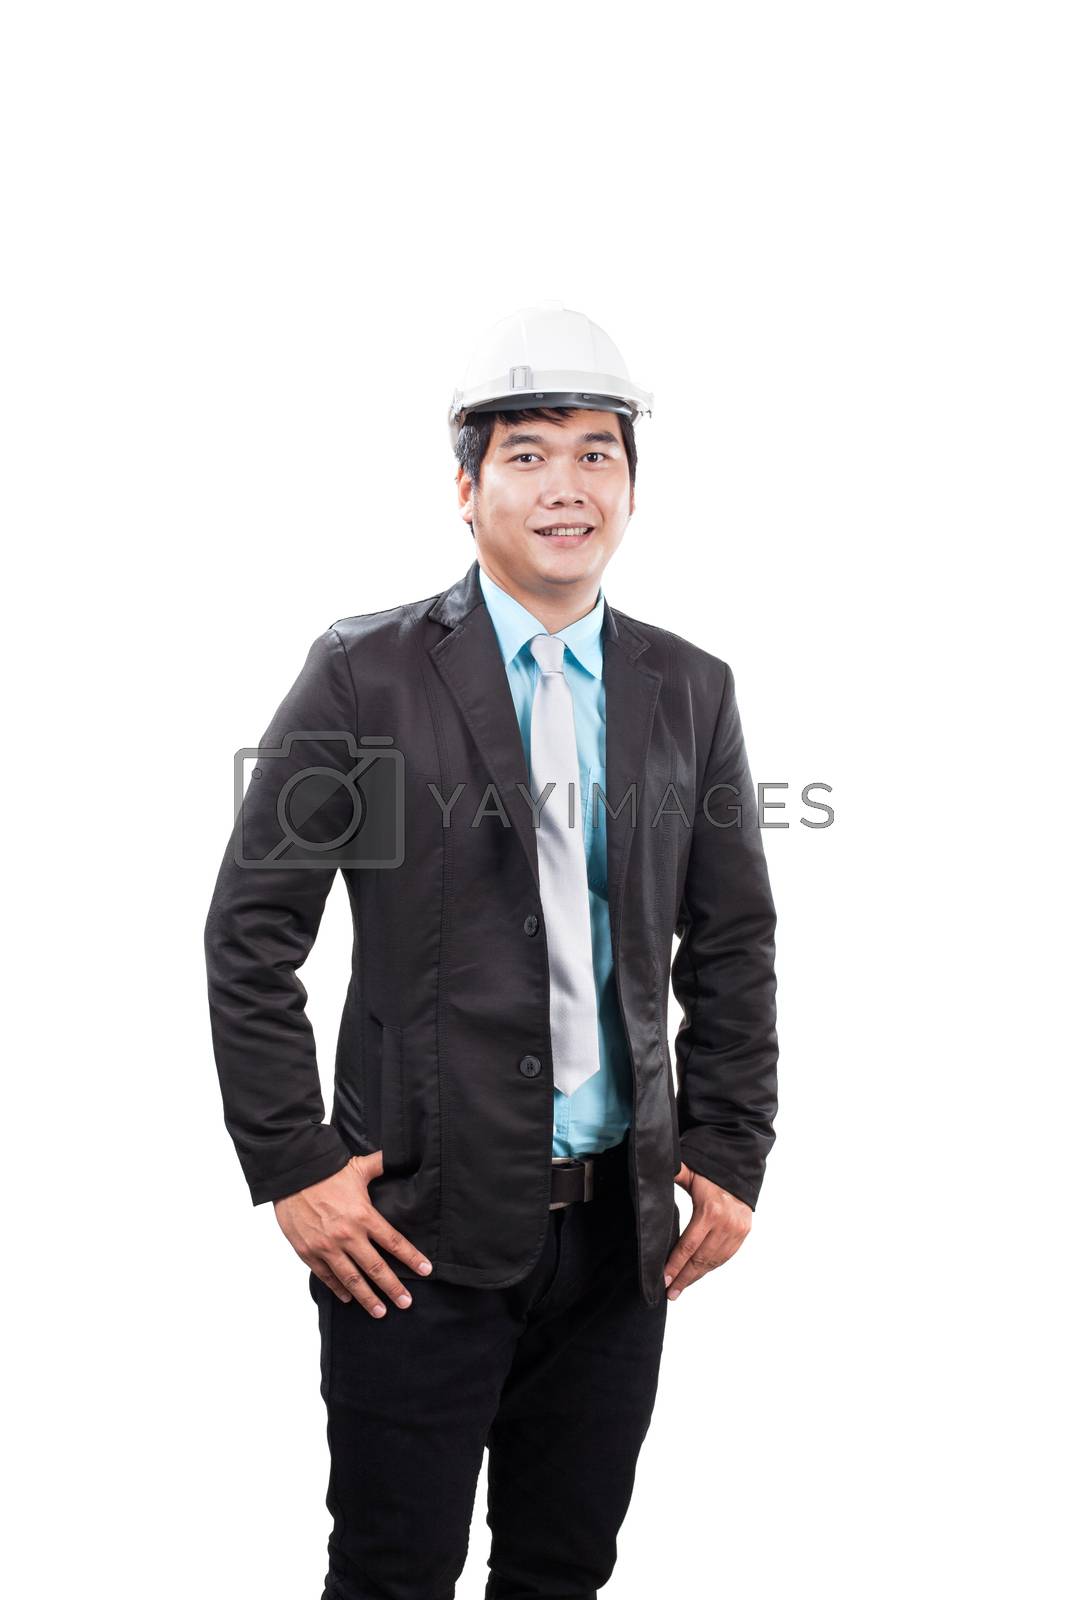 Royalty free image of engineering man wearing white safety helmet standing and smiling by khunaspix